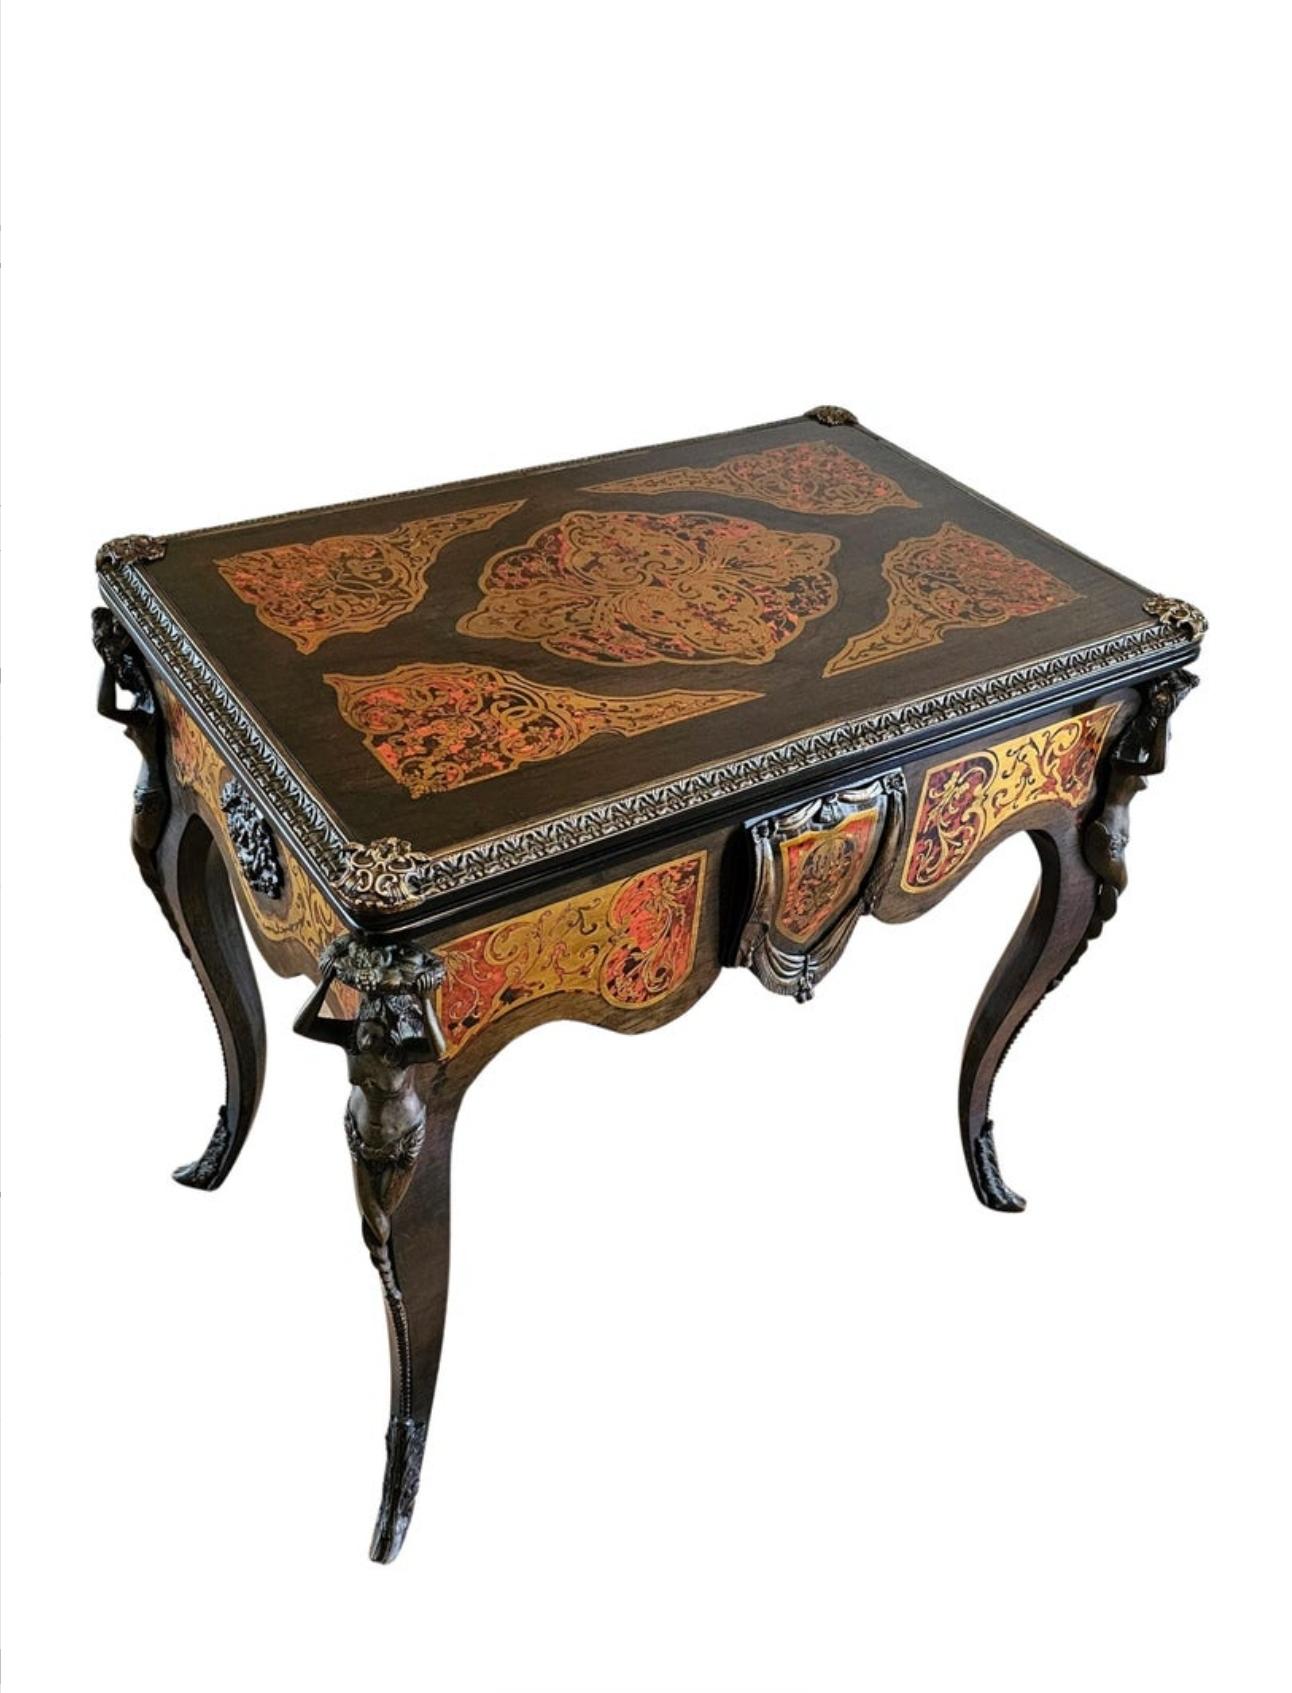 A fine French Napoleon III Second Empire Period (1852-1870) fliptop card game table.

Make a statement with this striking example of high-quality Parisian craftsmanship. Exquisitely handcrafted in France in the Mmid-19th Century, exceptionally